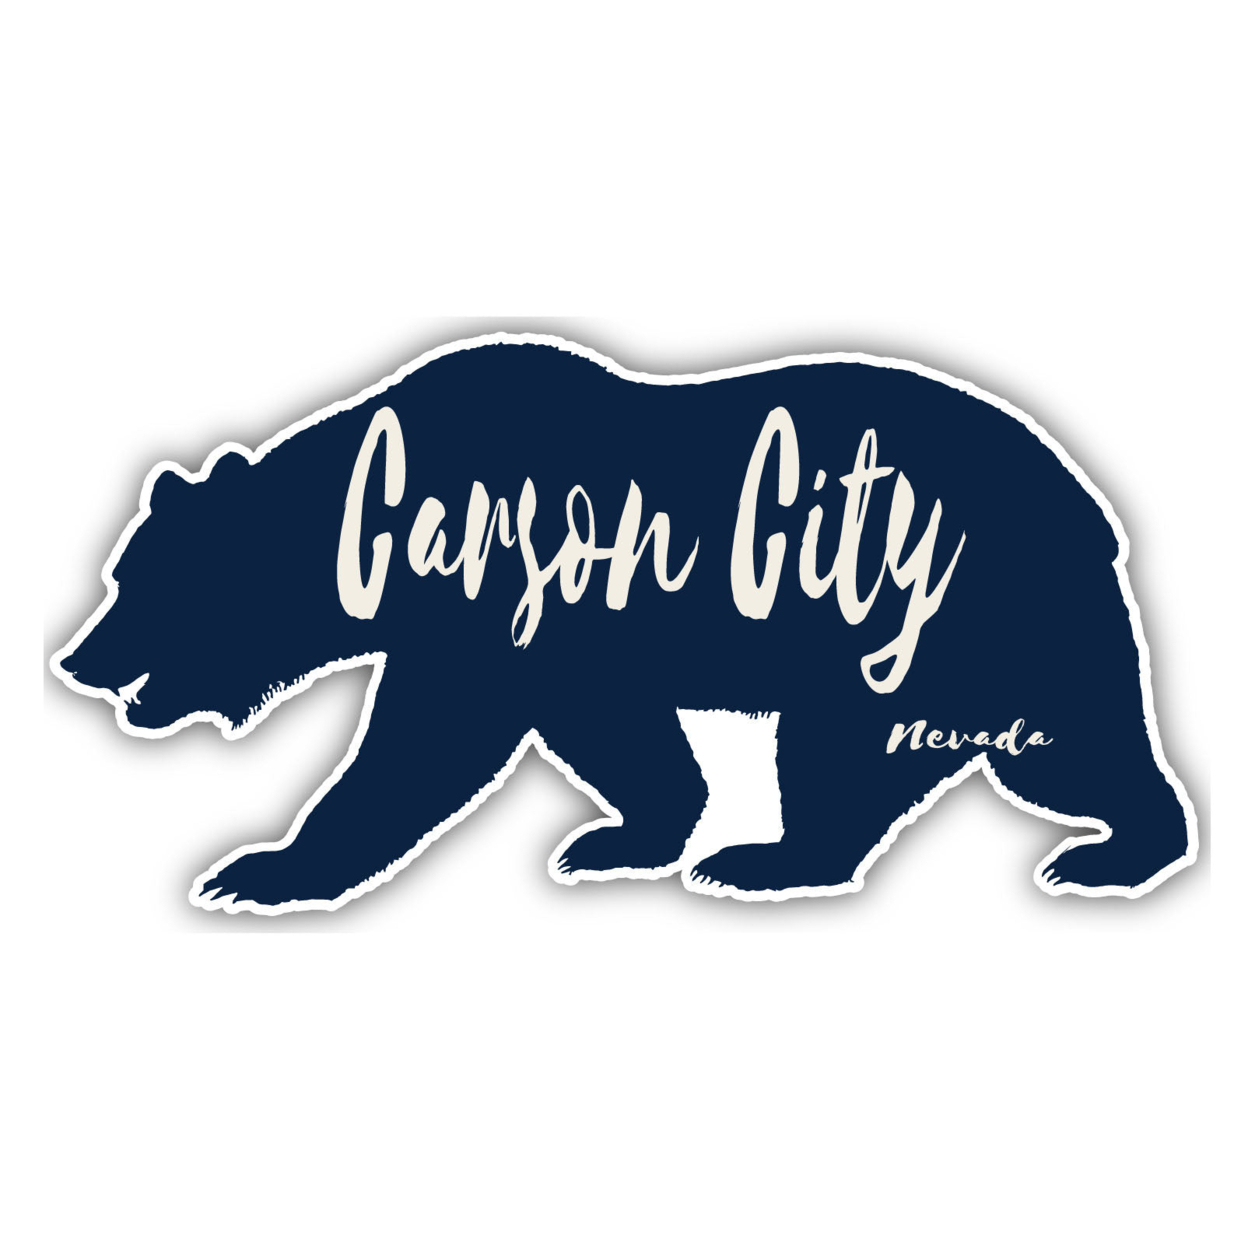 Carson City Nevada Souvenir Decorative Stickers (Choose Theme And Size) - 4-Pack, 12-Inch, Bear